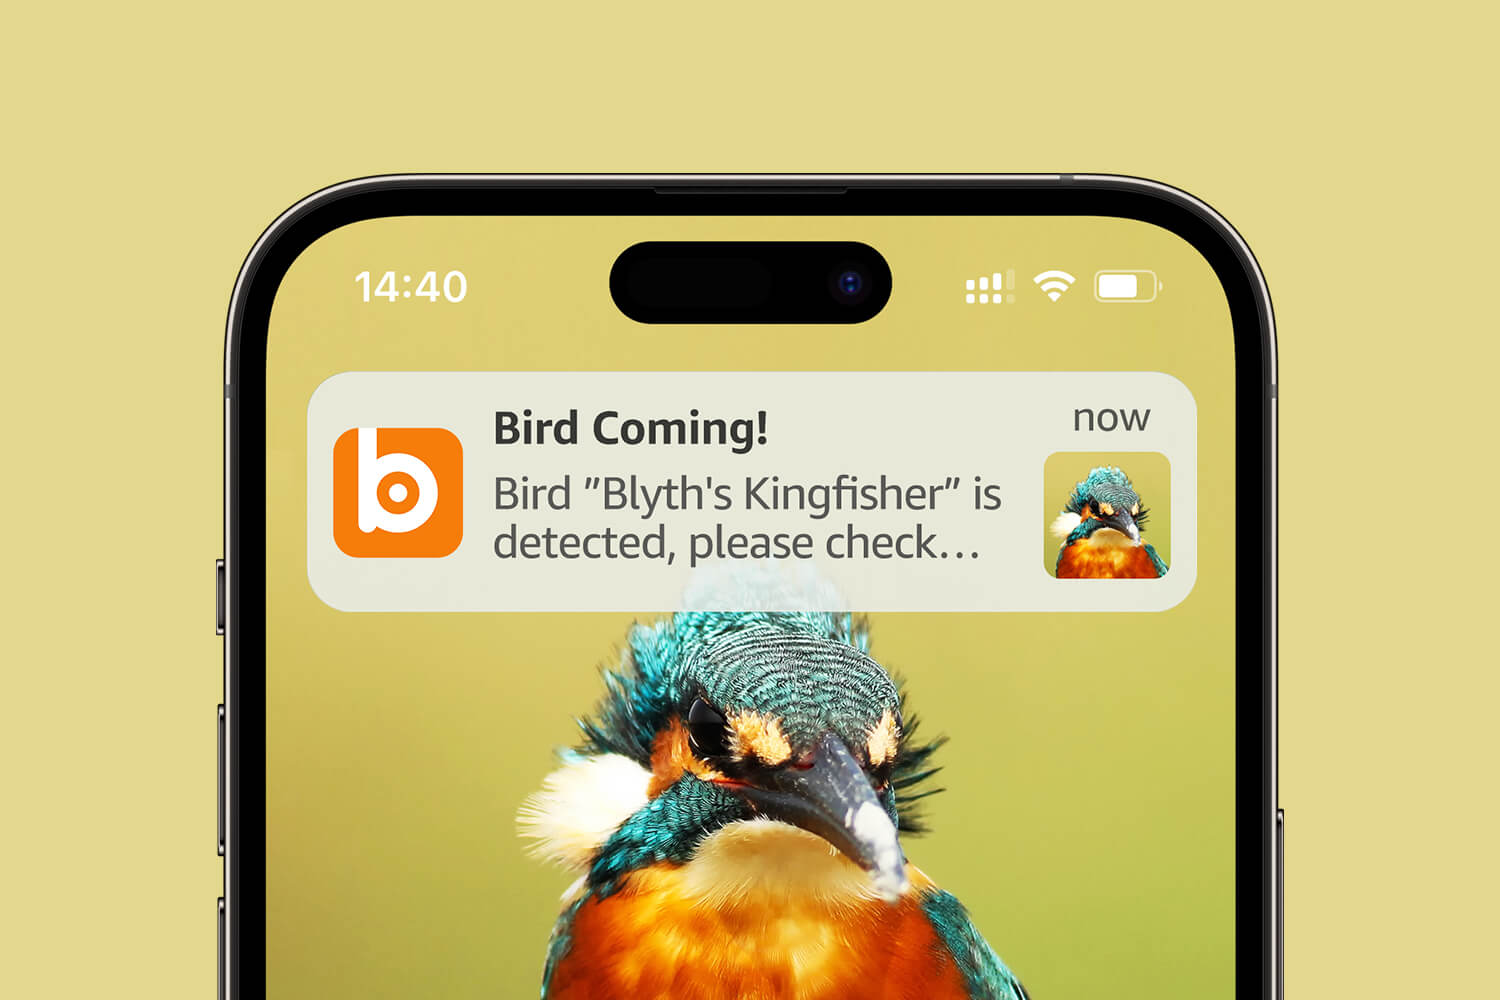 BirdHi Ultra, Receive timely notifications whenever birds visit, So you won't miss any birds that make you smile.